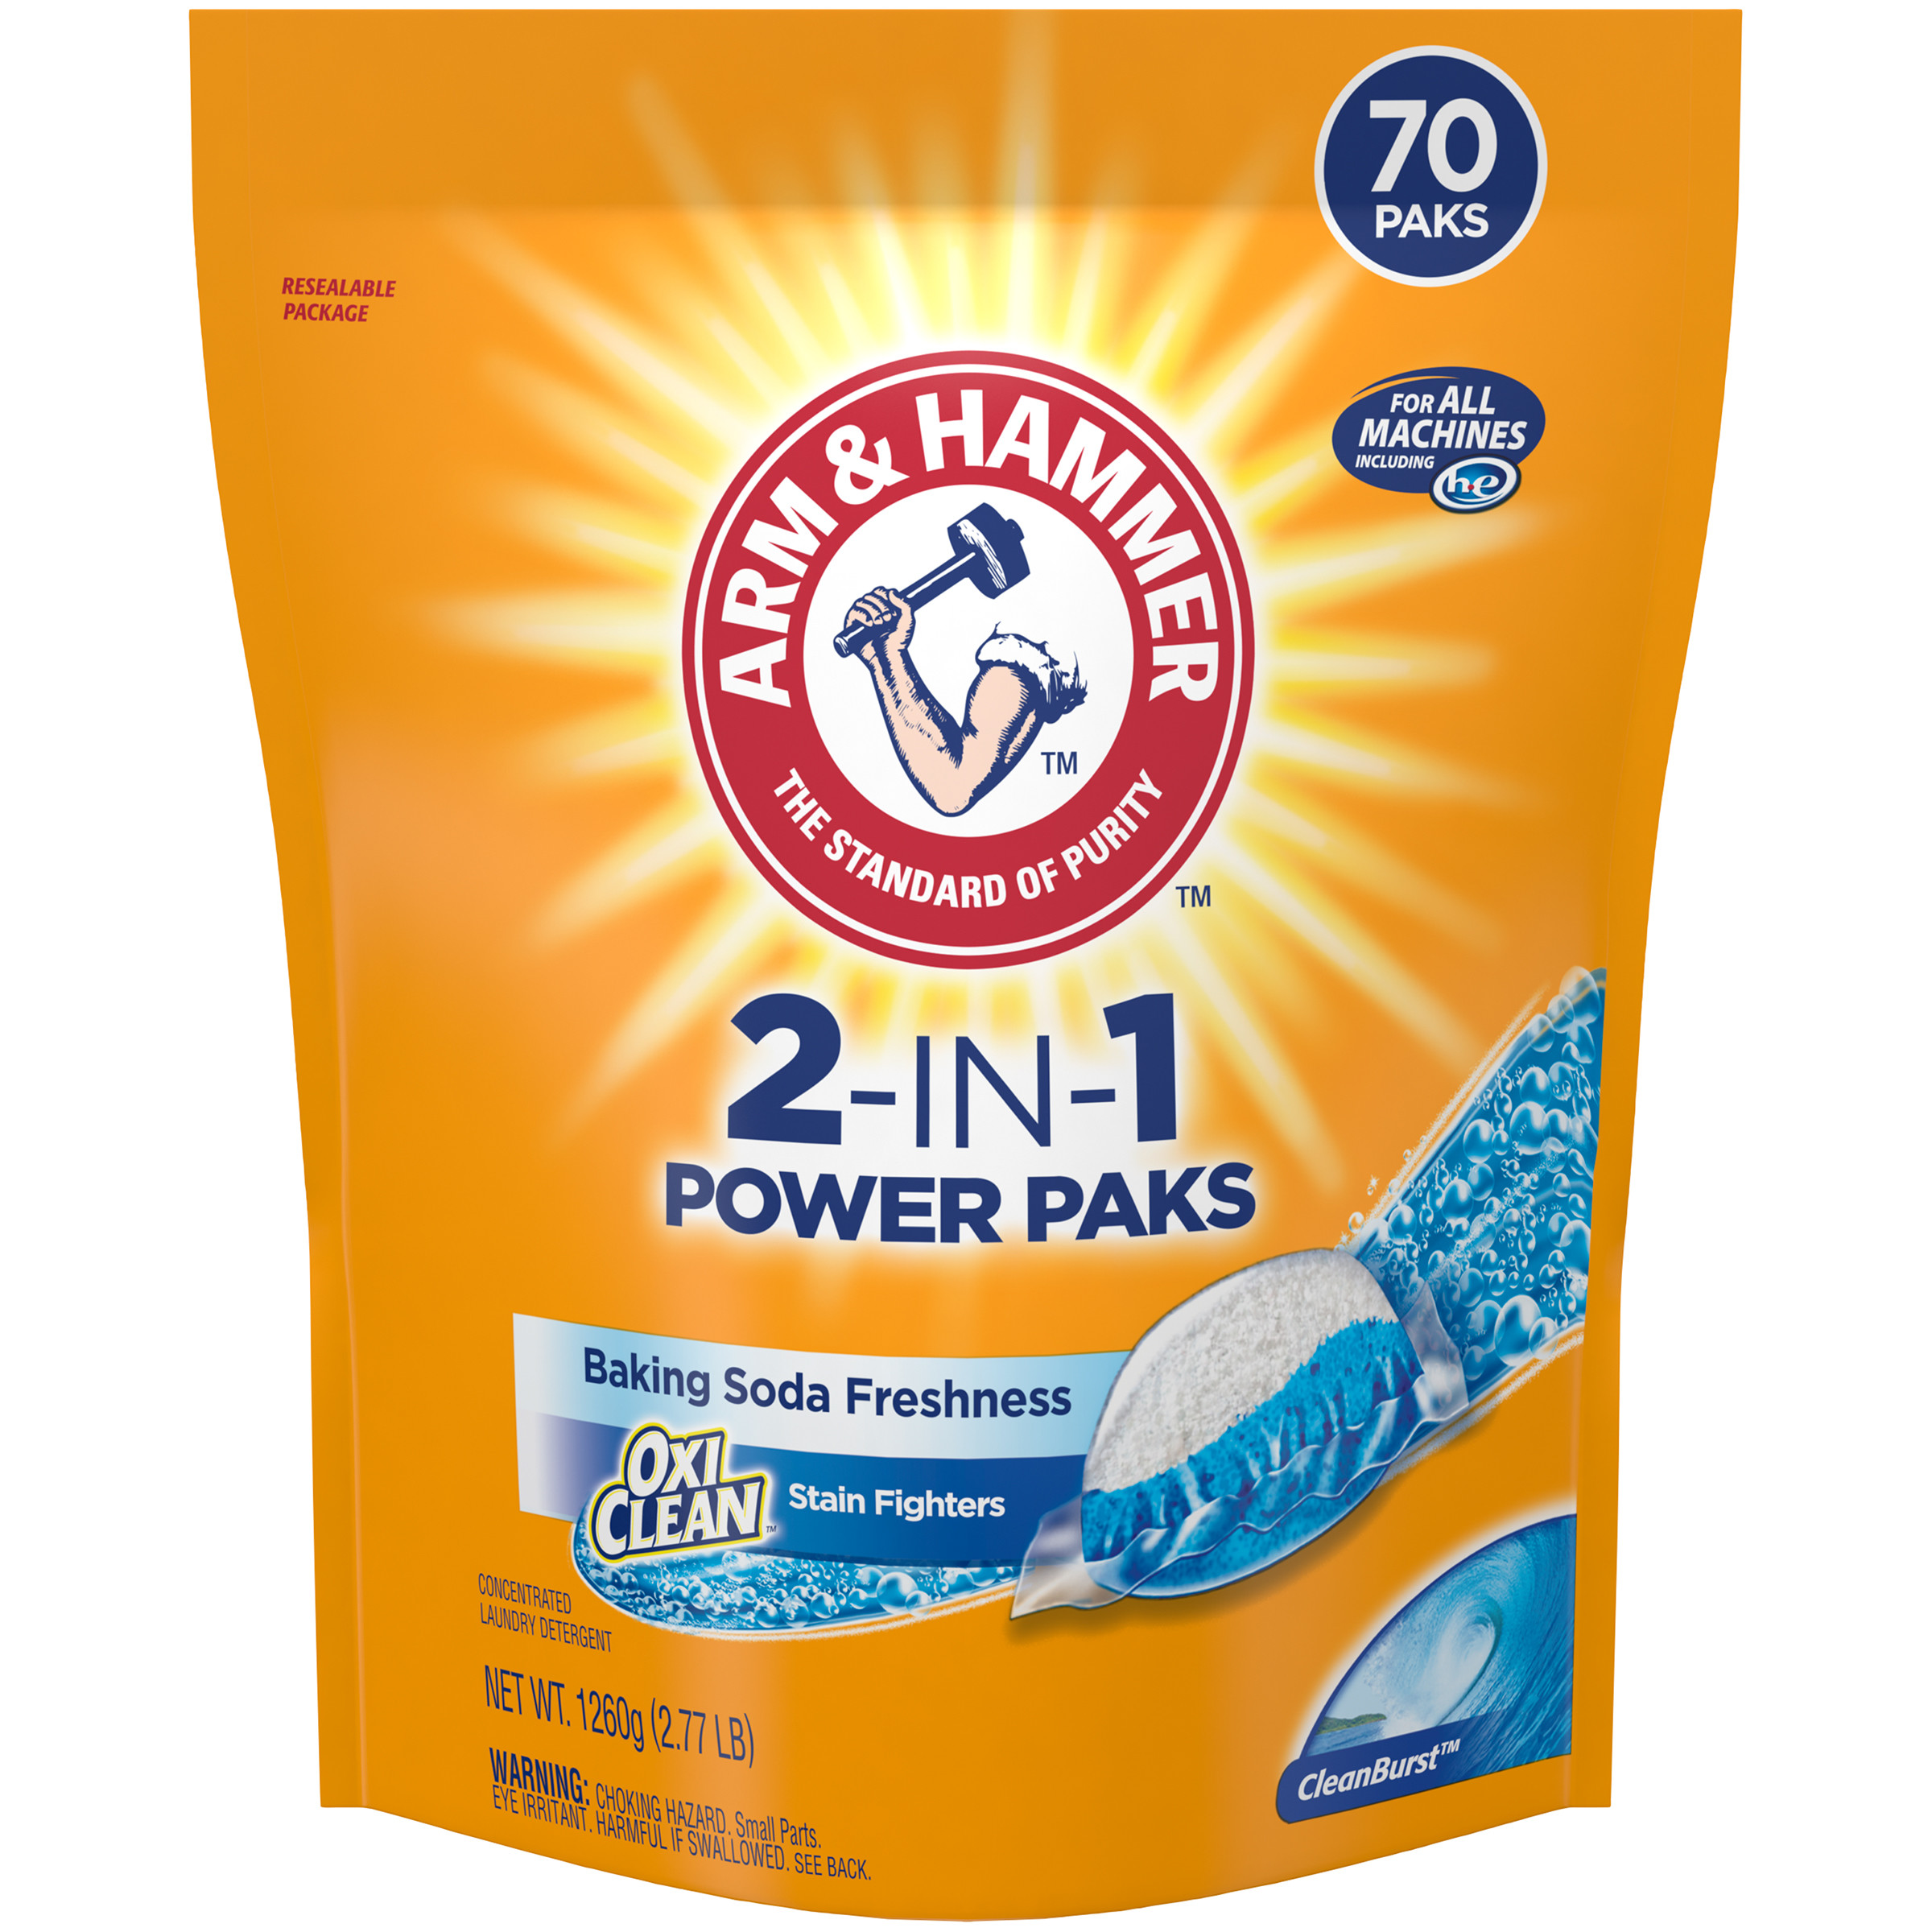 ARM  HAMMER 2-IN-1 Laundry Detergent Power Paks, 70 Count - image 1 of 14